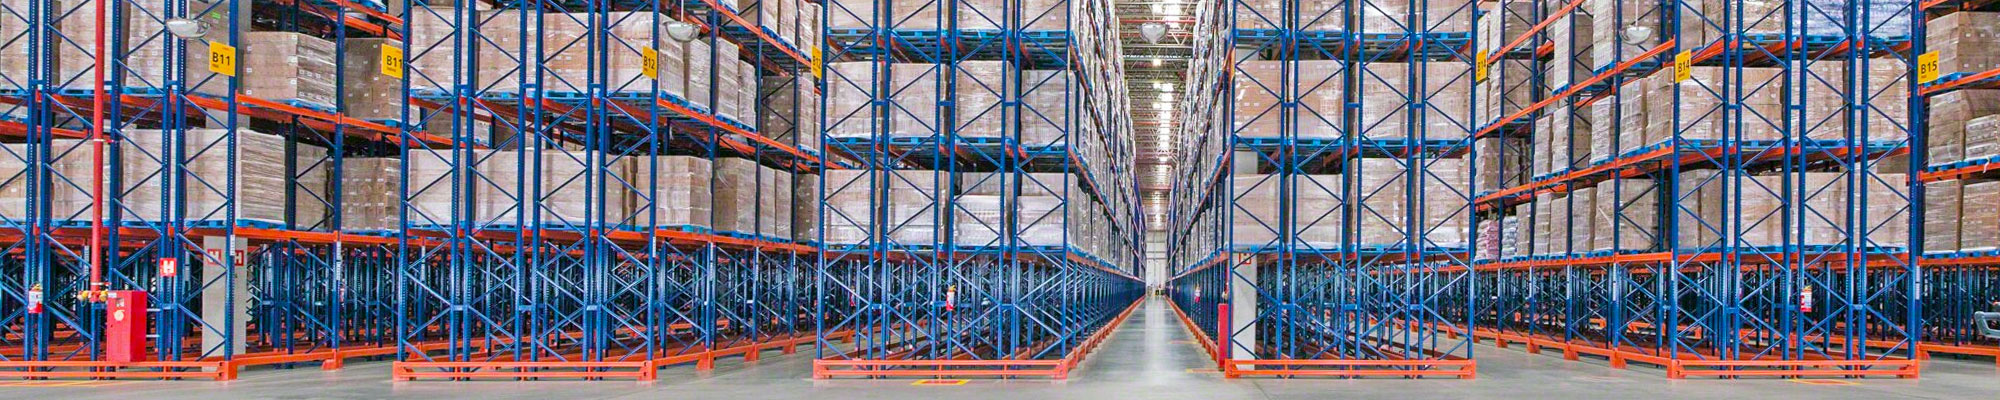 Rows of Warehouse Pallet Racking